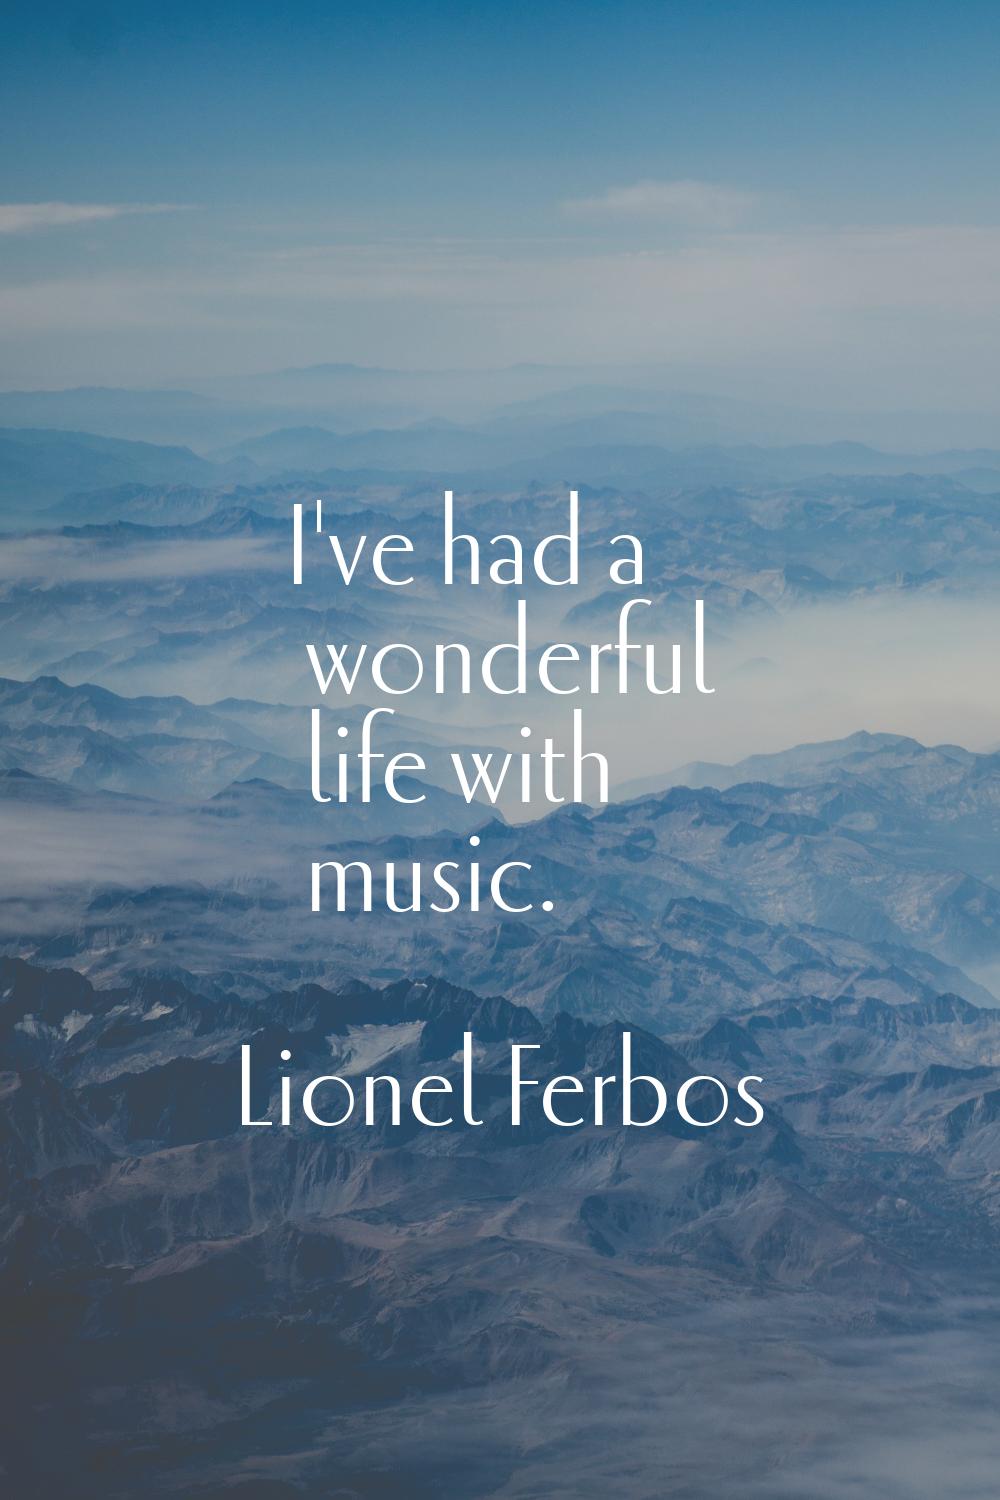 I've had a wonderful life with music.